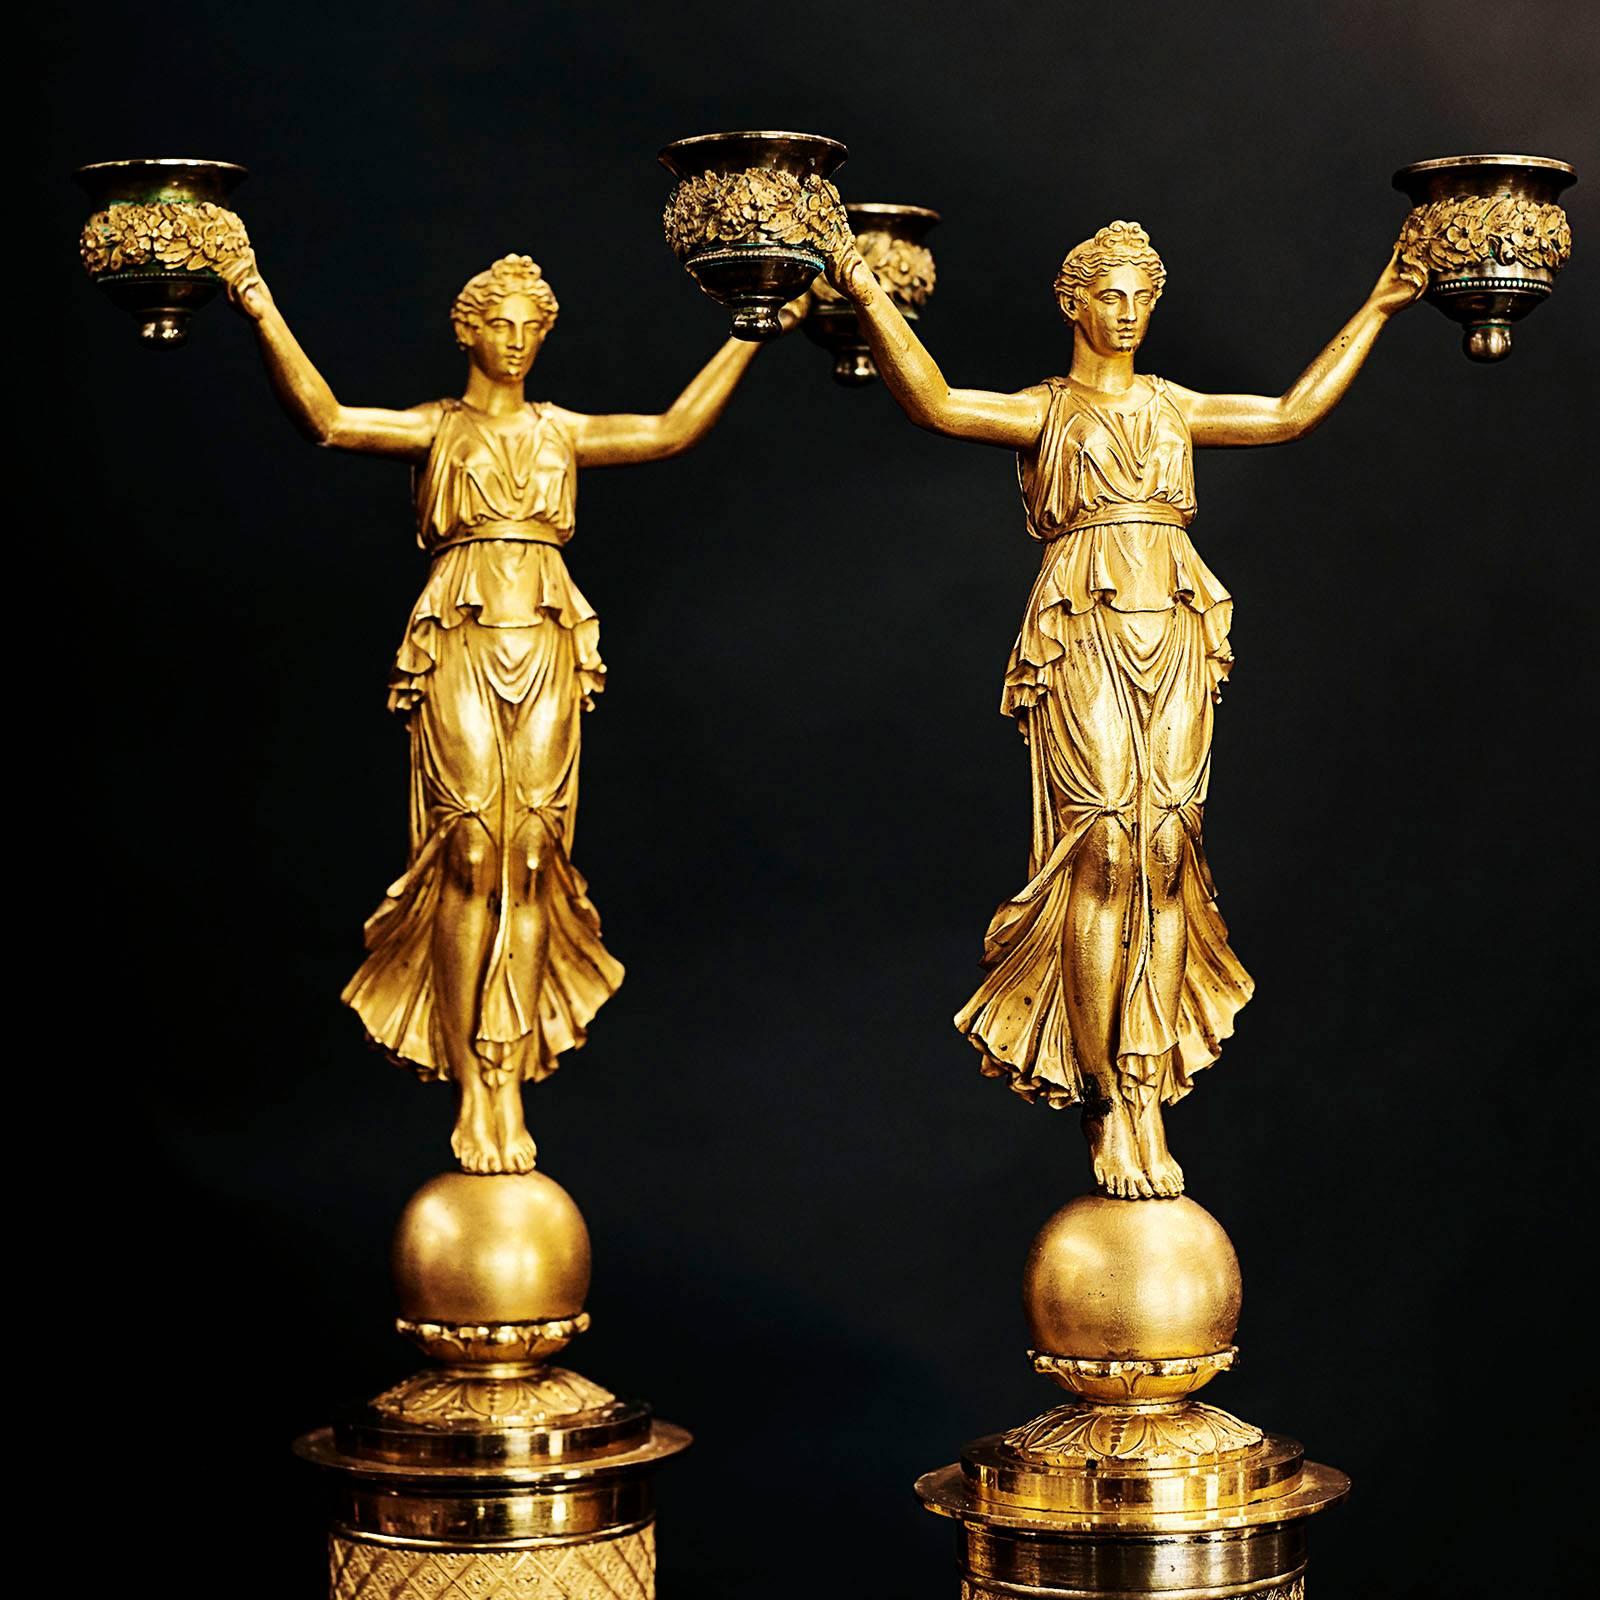 A fine pair of French Empire ormolu candelabra, circa 1810, each with a woman with outstretched arms holding garlands with candle holders, mounted on a sphere and raised on a casts round pedestal with a square plinth base. Superb castings and